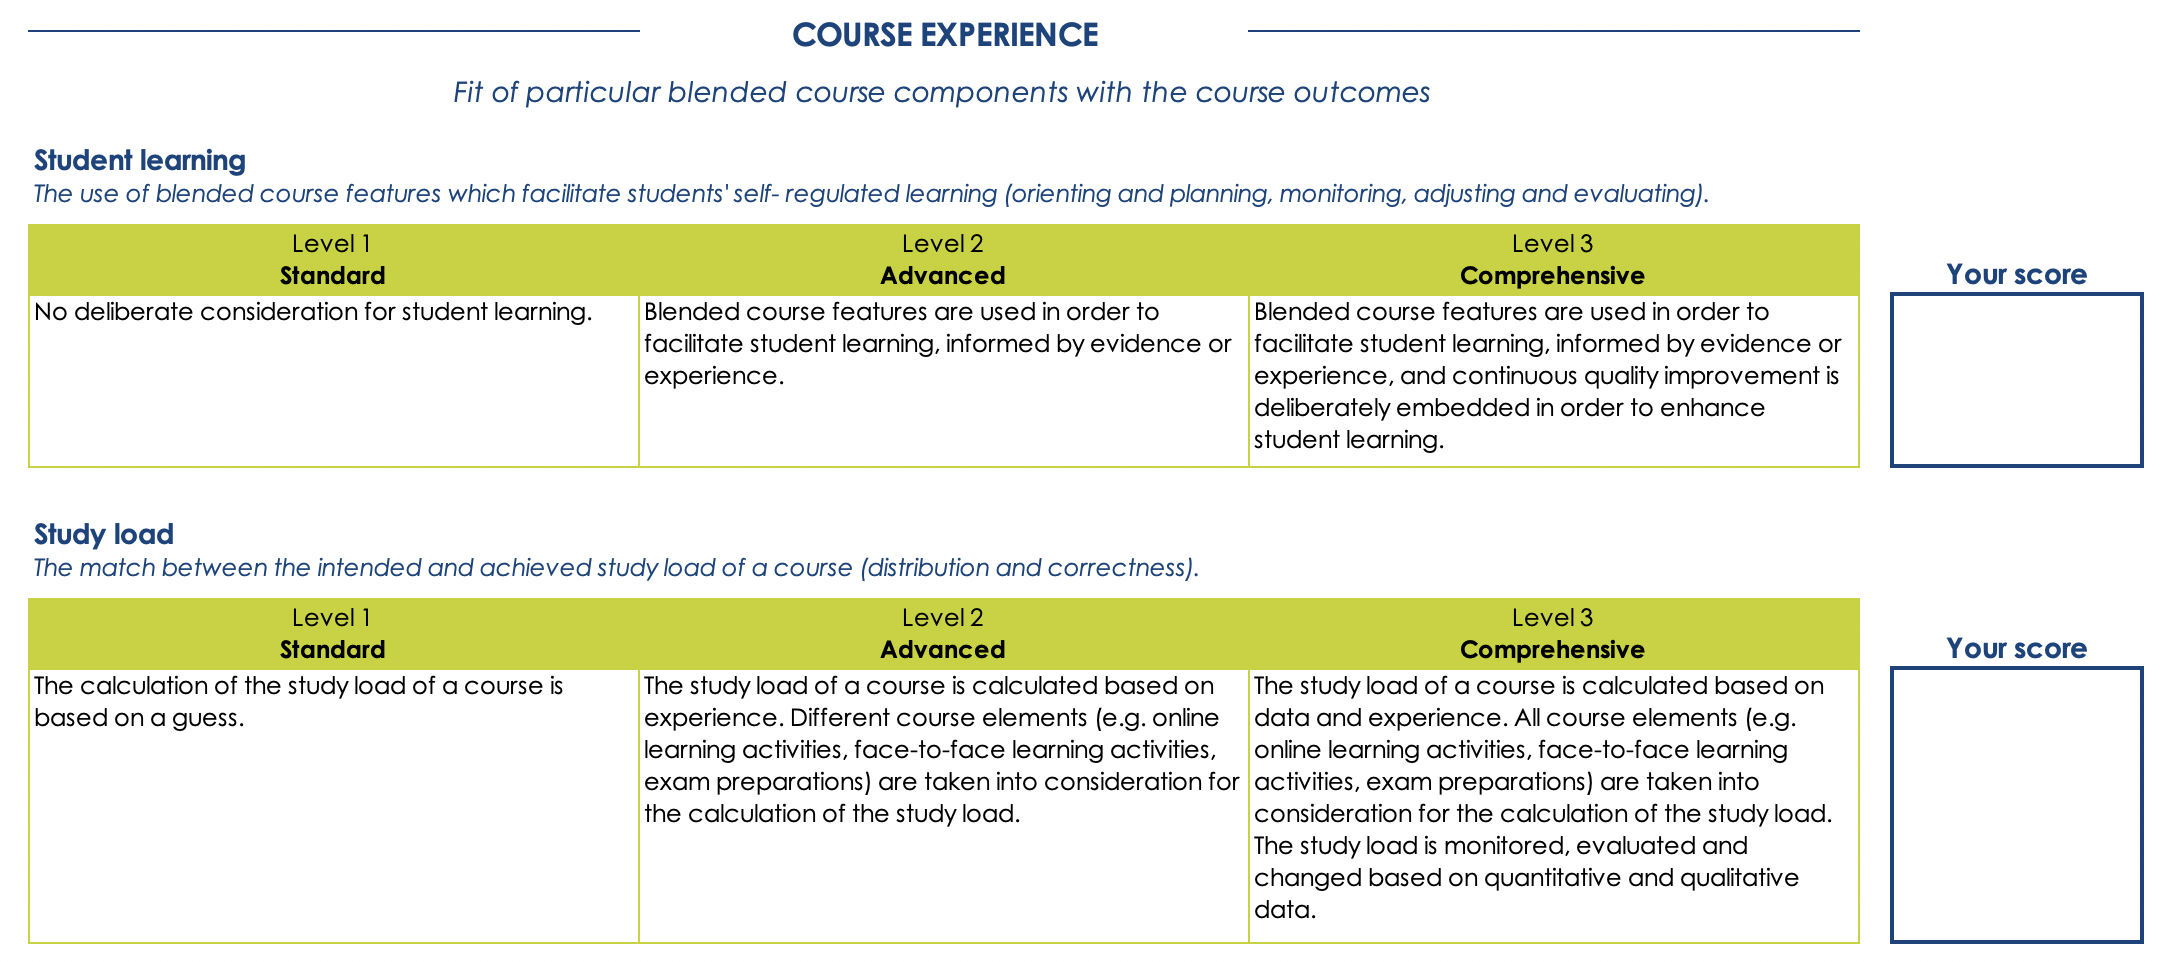 course experience dimension EMBED